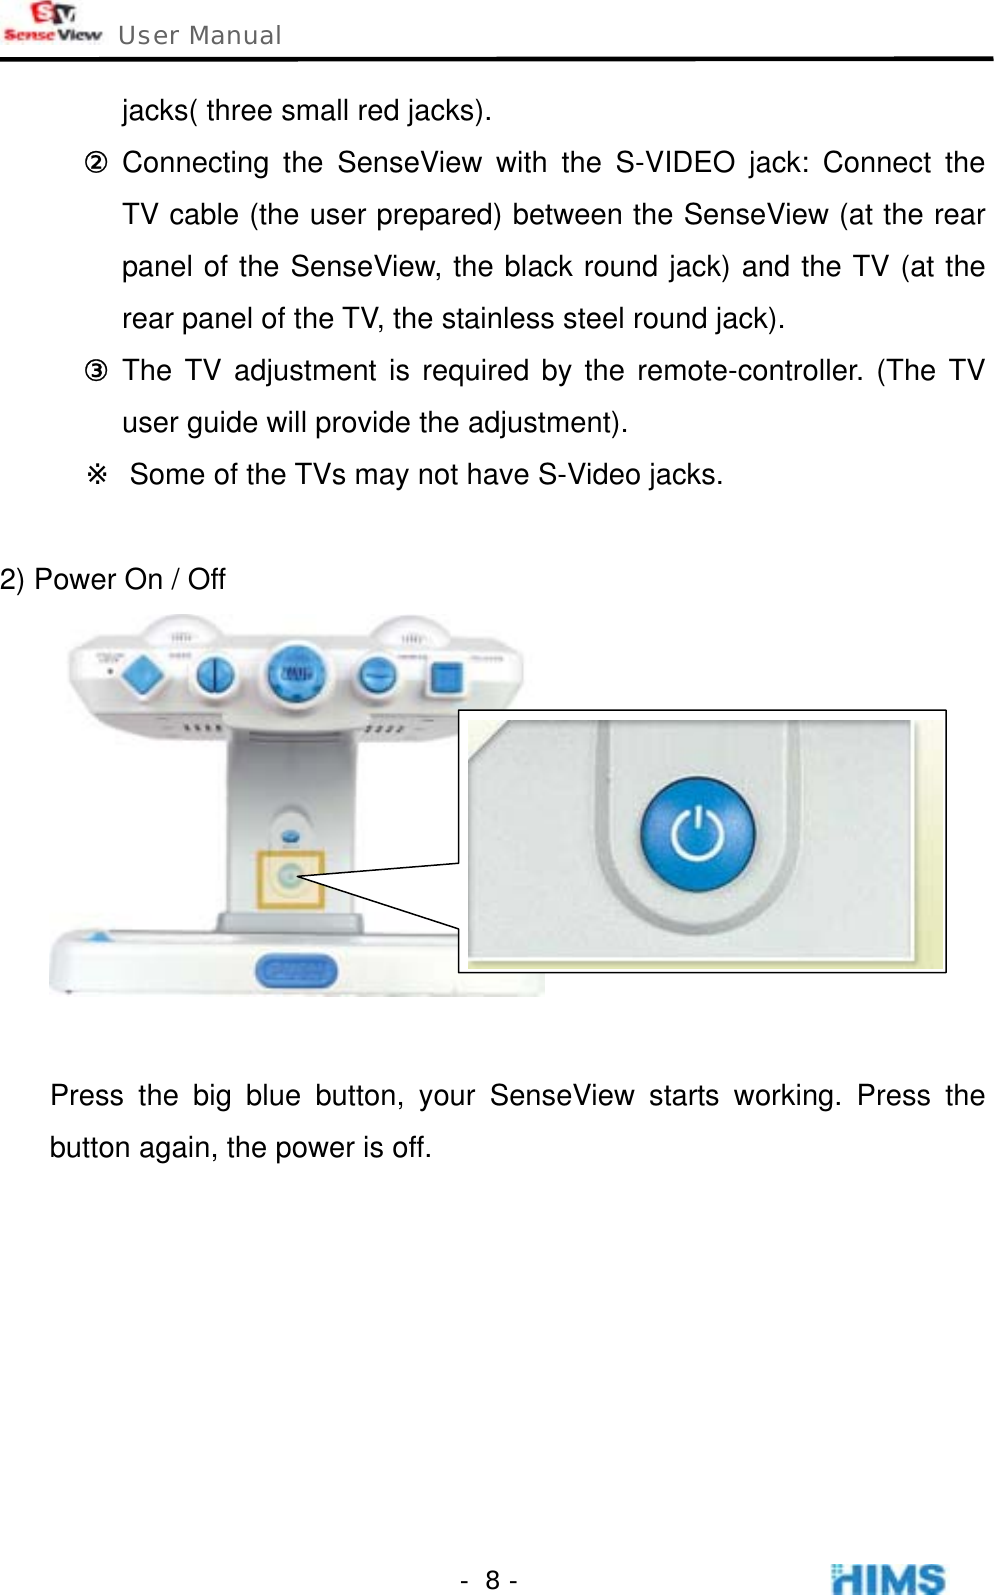  User Manual    - 8 -jacks( three small red jacks).   ② Connecting the SenseView with the S-VIDEO jack: Connect the TV cable (the user prepared) between the SenseView (at the rear panel of the SenseView, the black round jack) and the TV (at the rear panel of the TV, the stainless steel round jack). ③ The TV adjustment is required by the remote-controller. (The TV user guide will provide the adjustment). ※  Some of the TVs may not have S-Video jacks.   2) Power On / Off   Press the big blue button, your SenseView starts working. Press the button again, the power is off.        